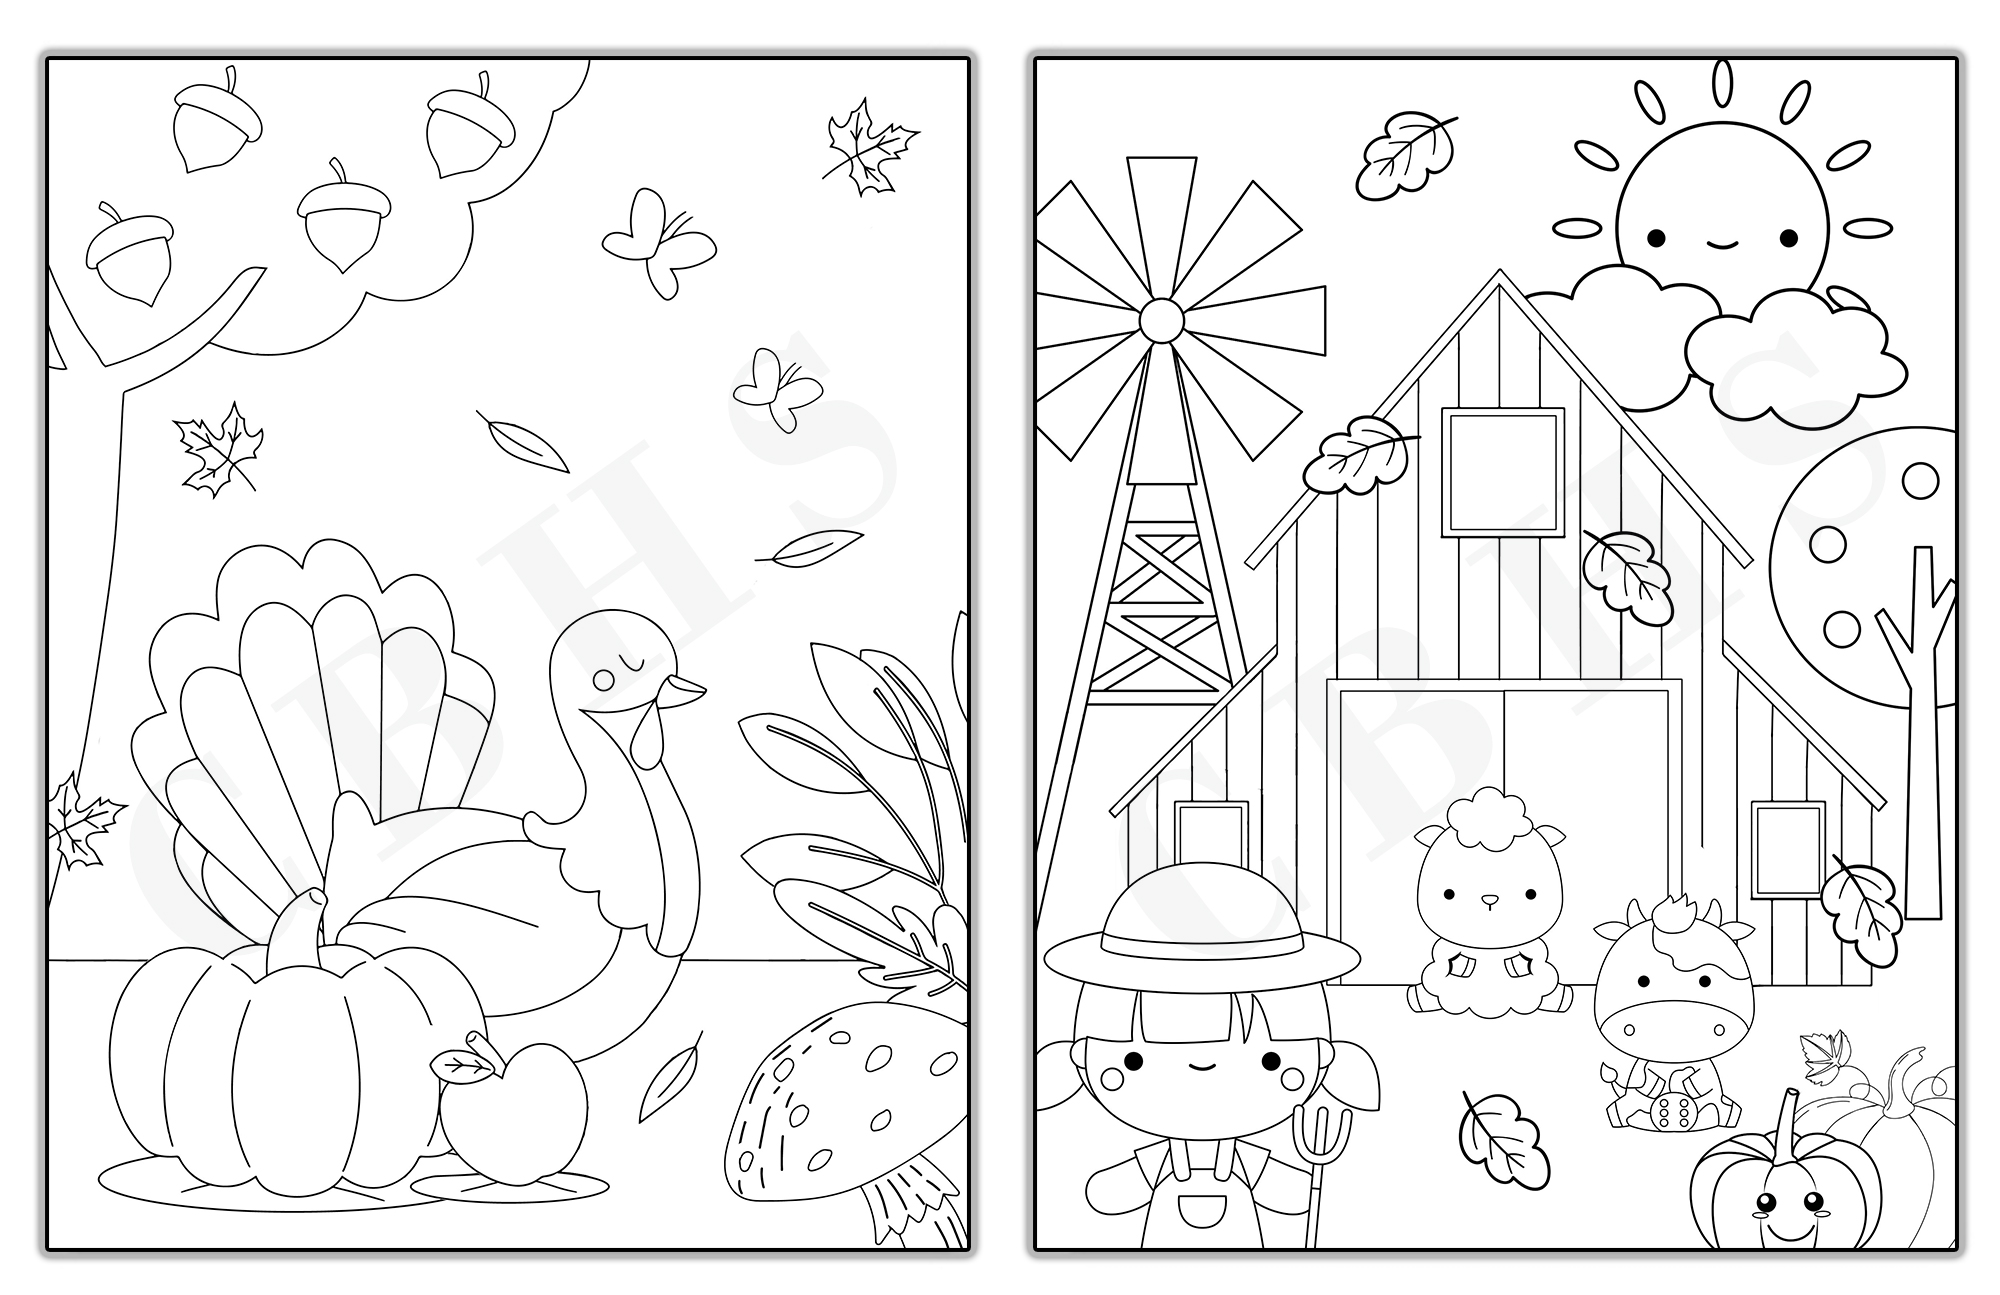 Pdf thanksgiving and fall coloring pages for kids made by teachers